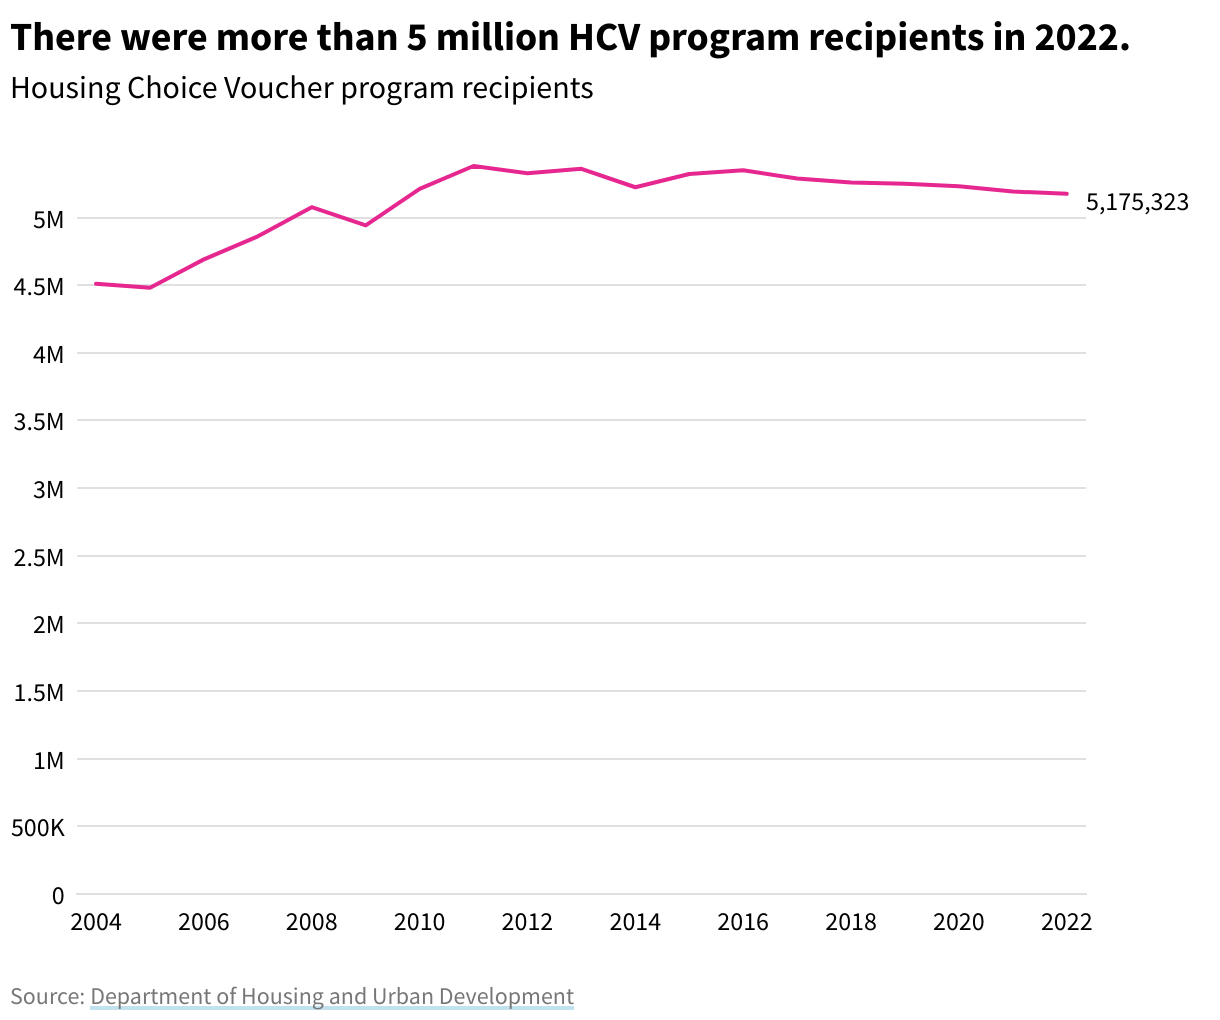 Line chart showing total Housing Choice Voucher program recipients from 2004 to 2022. In 2022, there were 5,175,323.